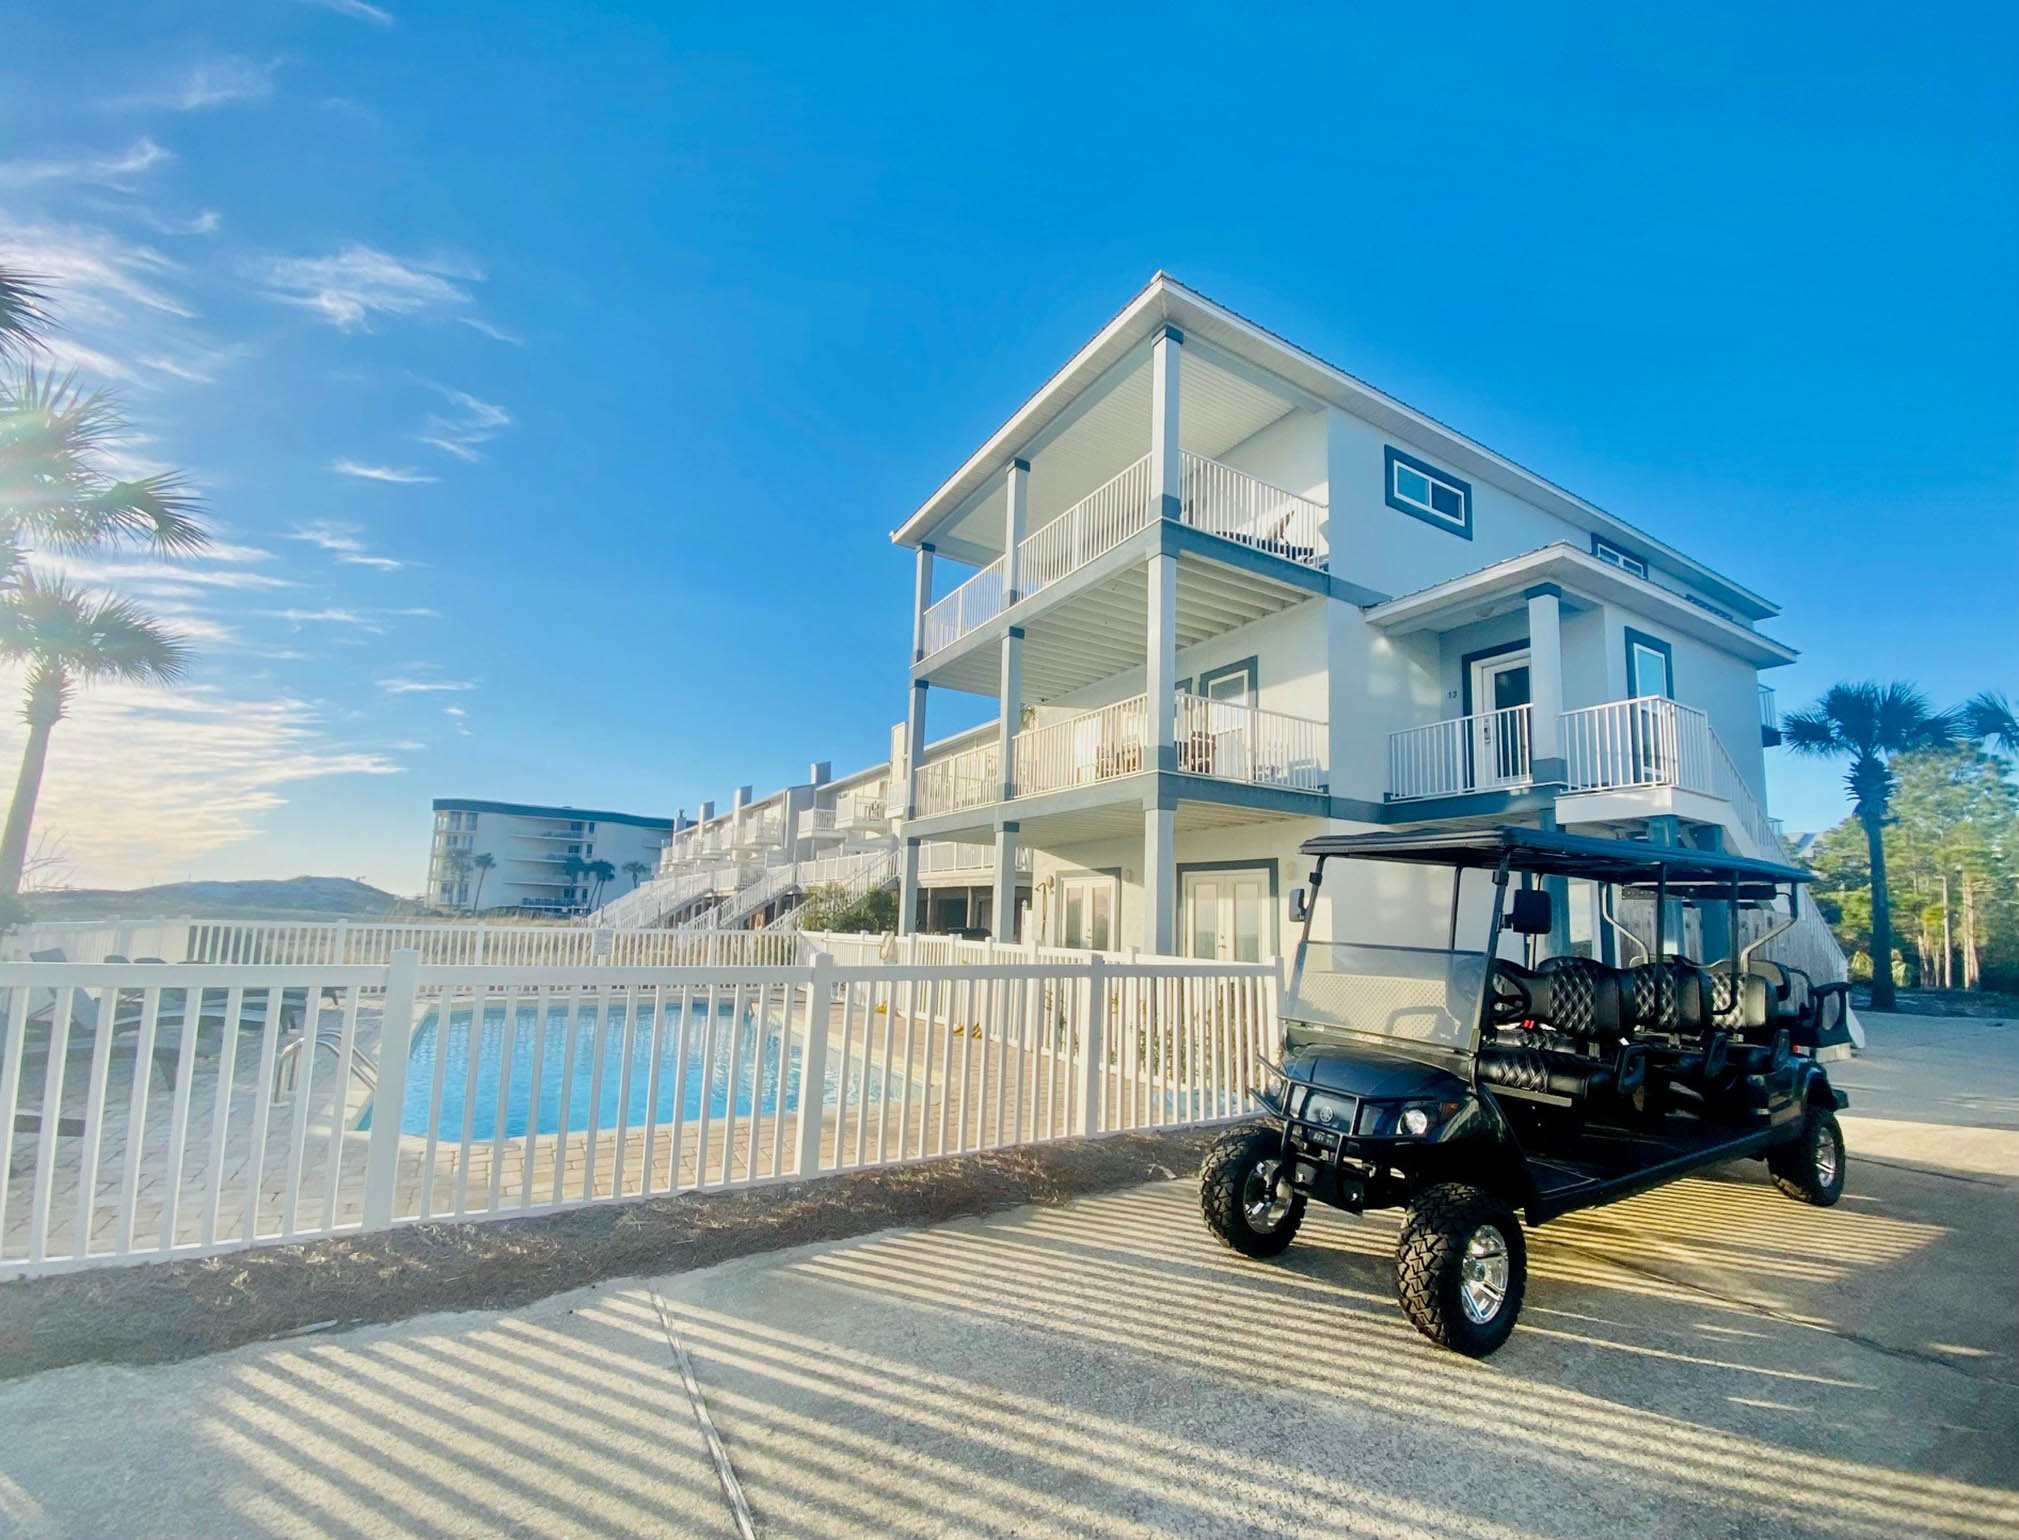 3 Generations Beach House with golf cart available!